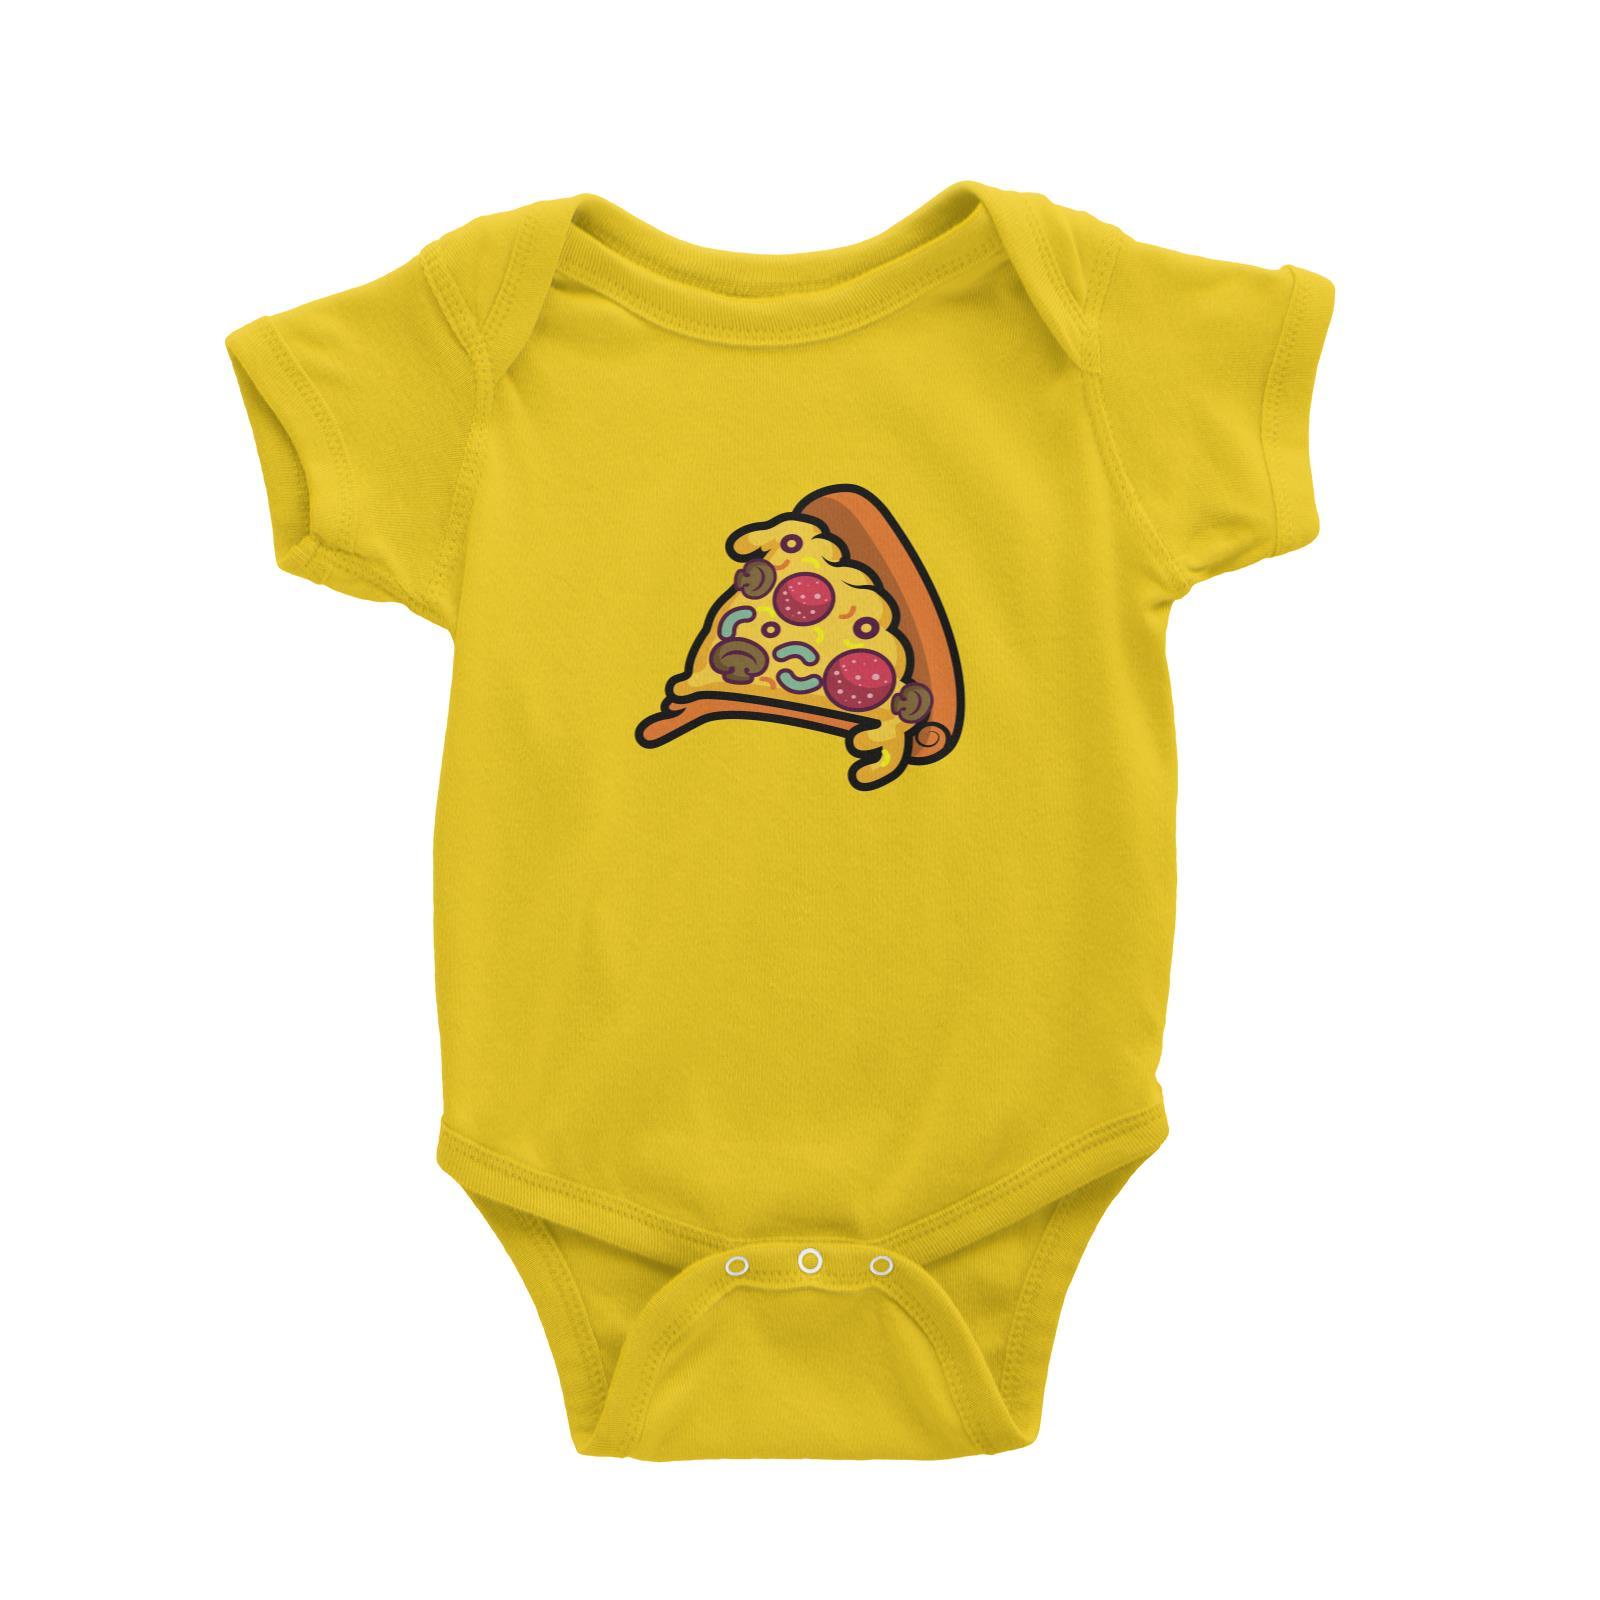 Fast Food Pizza Slice Baby Romper  Matching Family Comic Cartoon